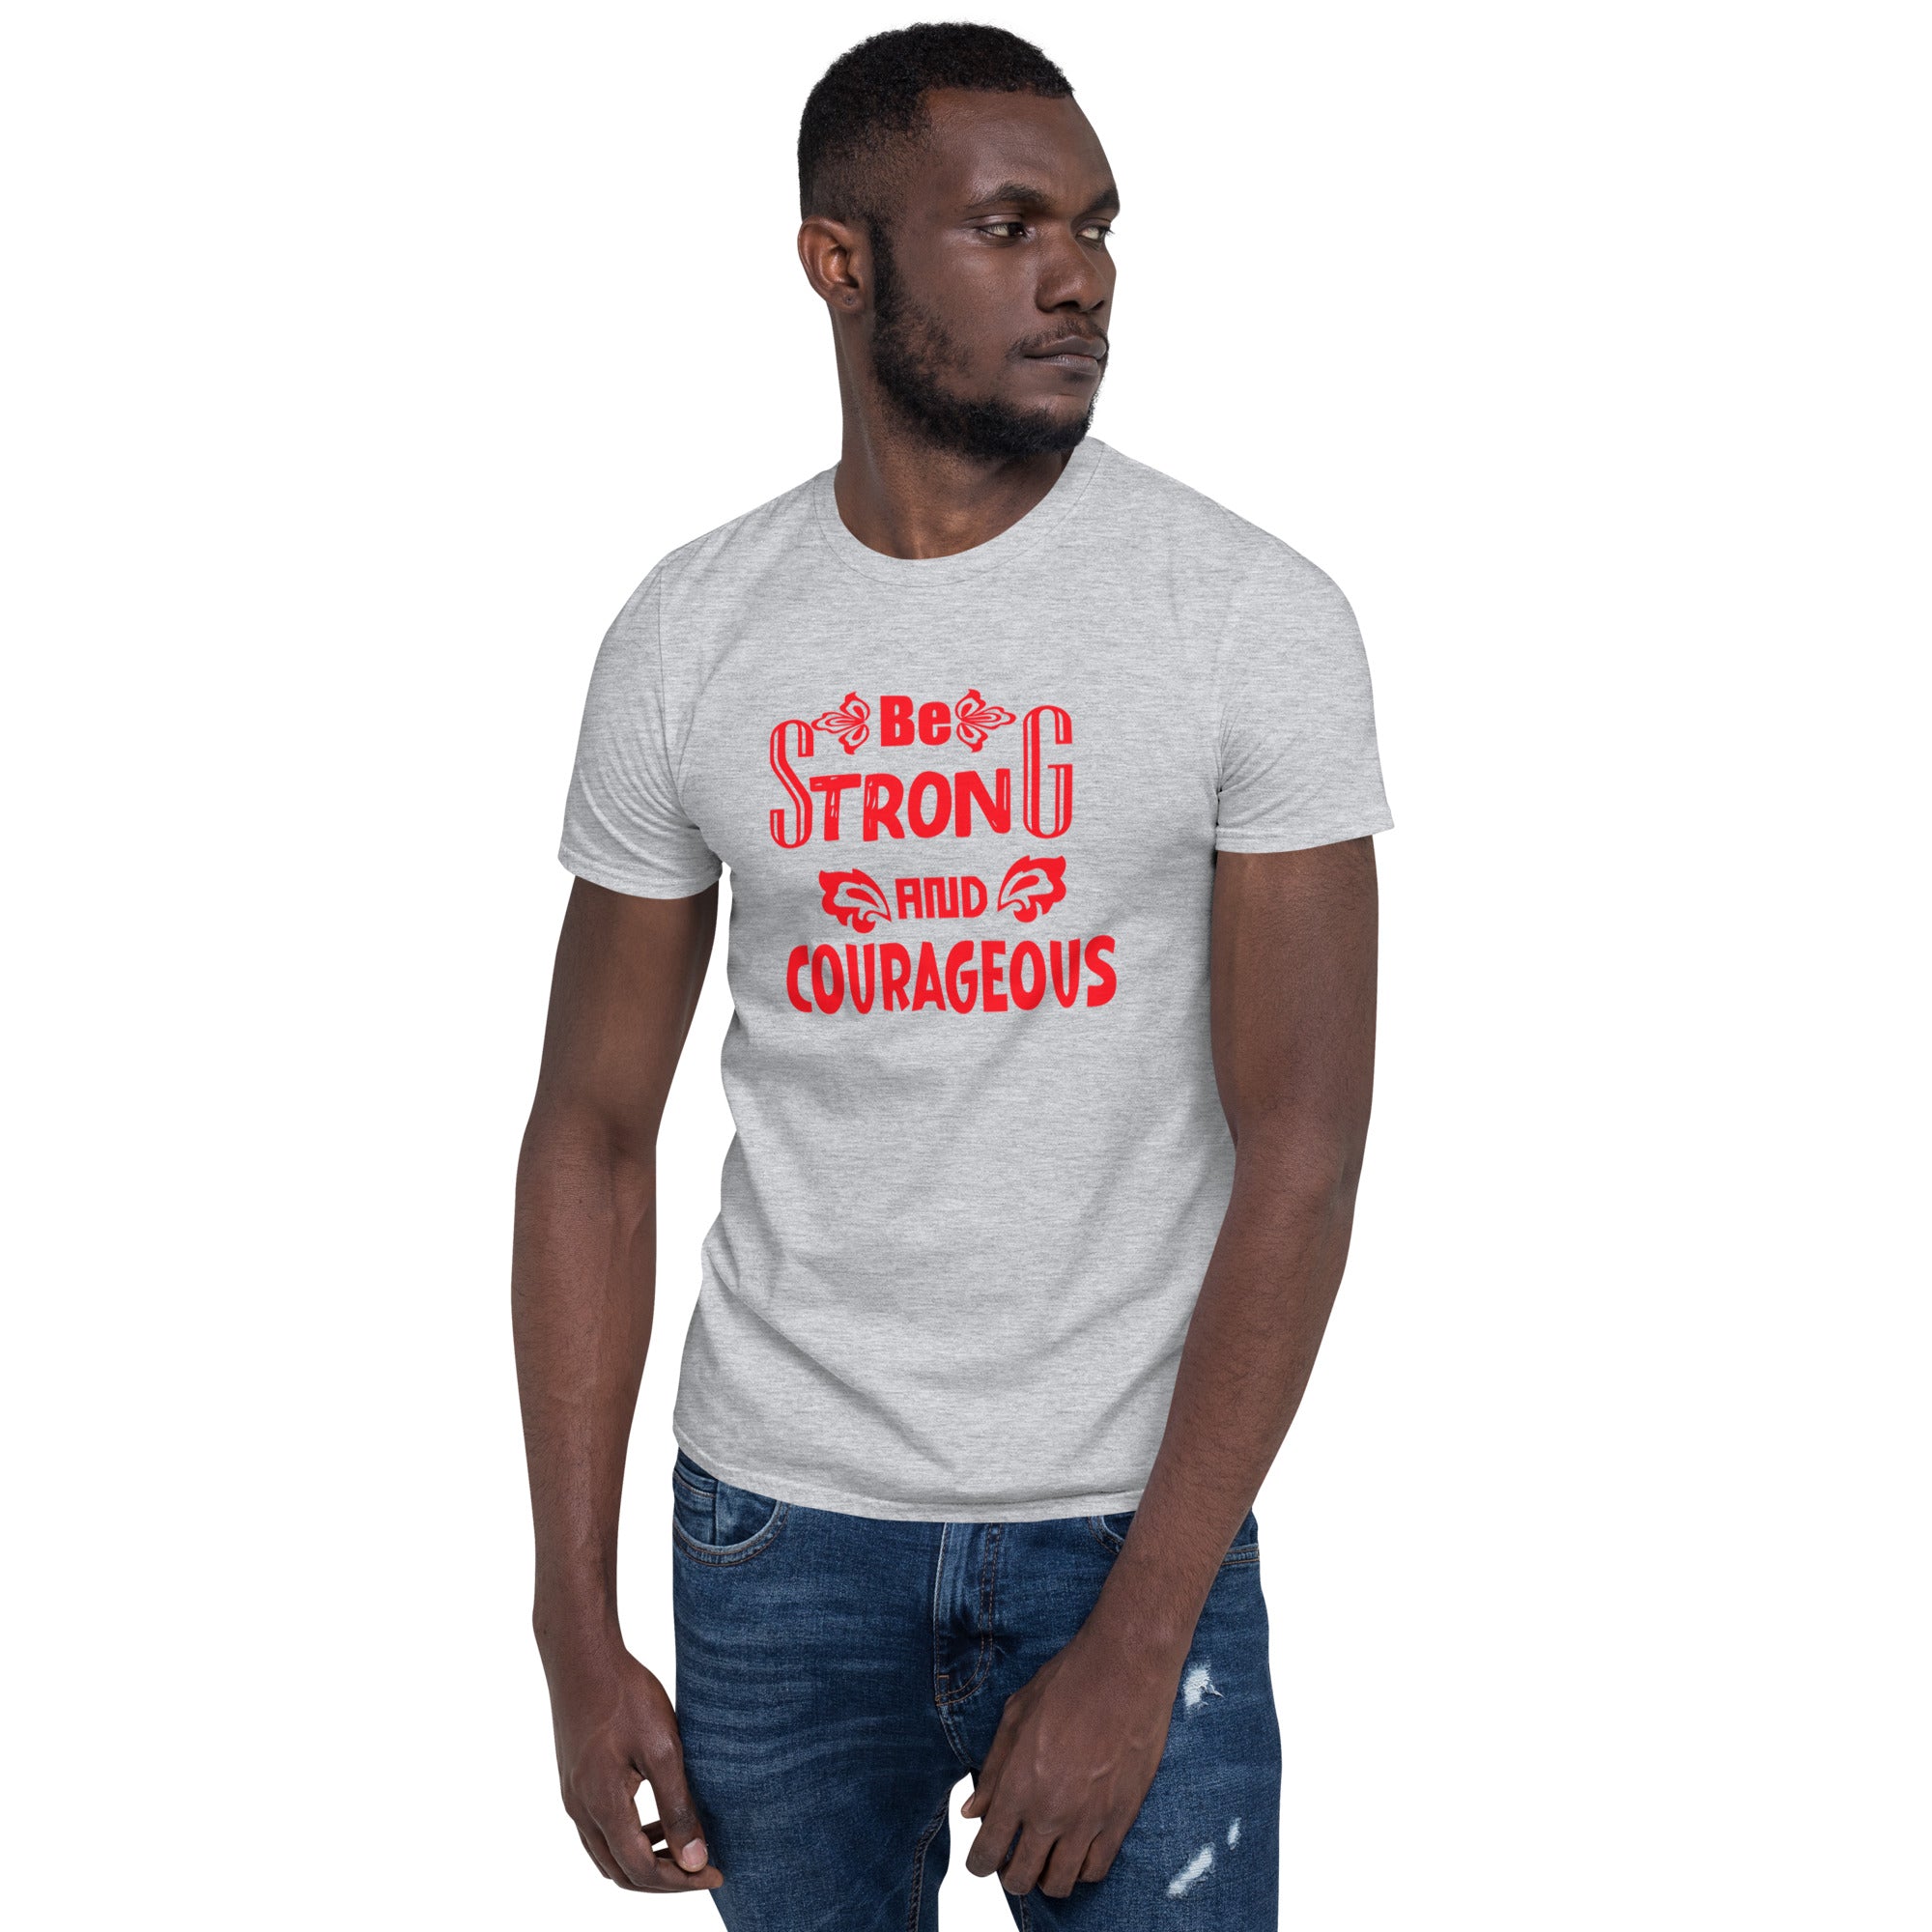 Be Strong And Courageous - Short-Sleeve Unisex T-Shirt